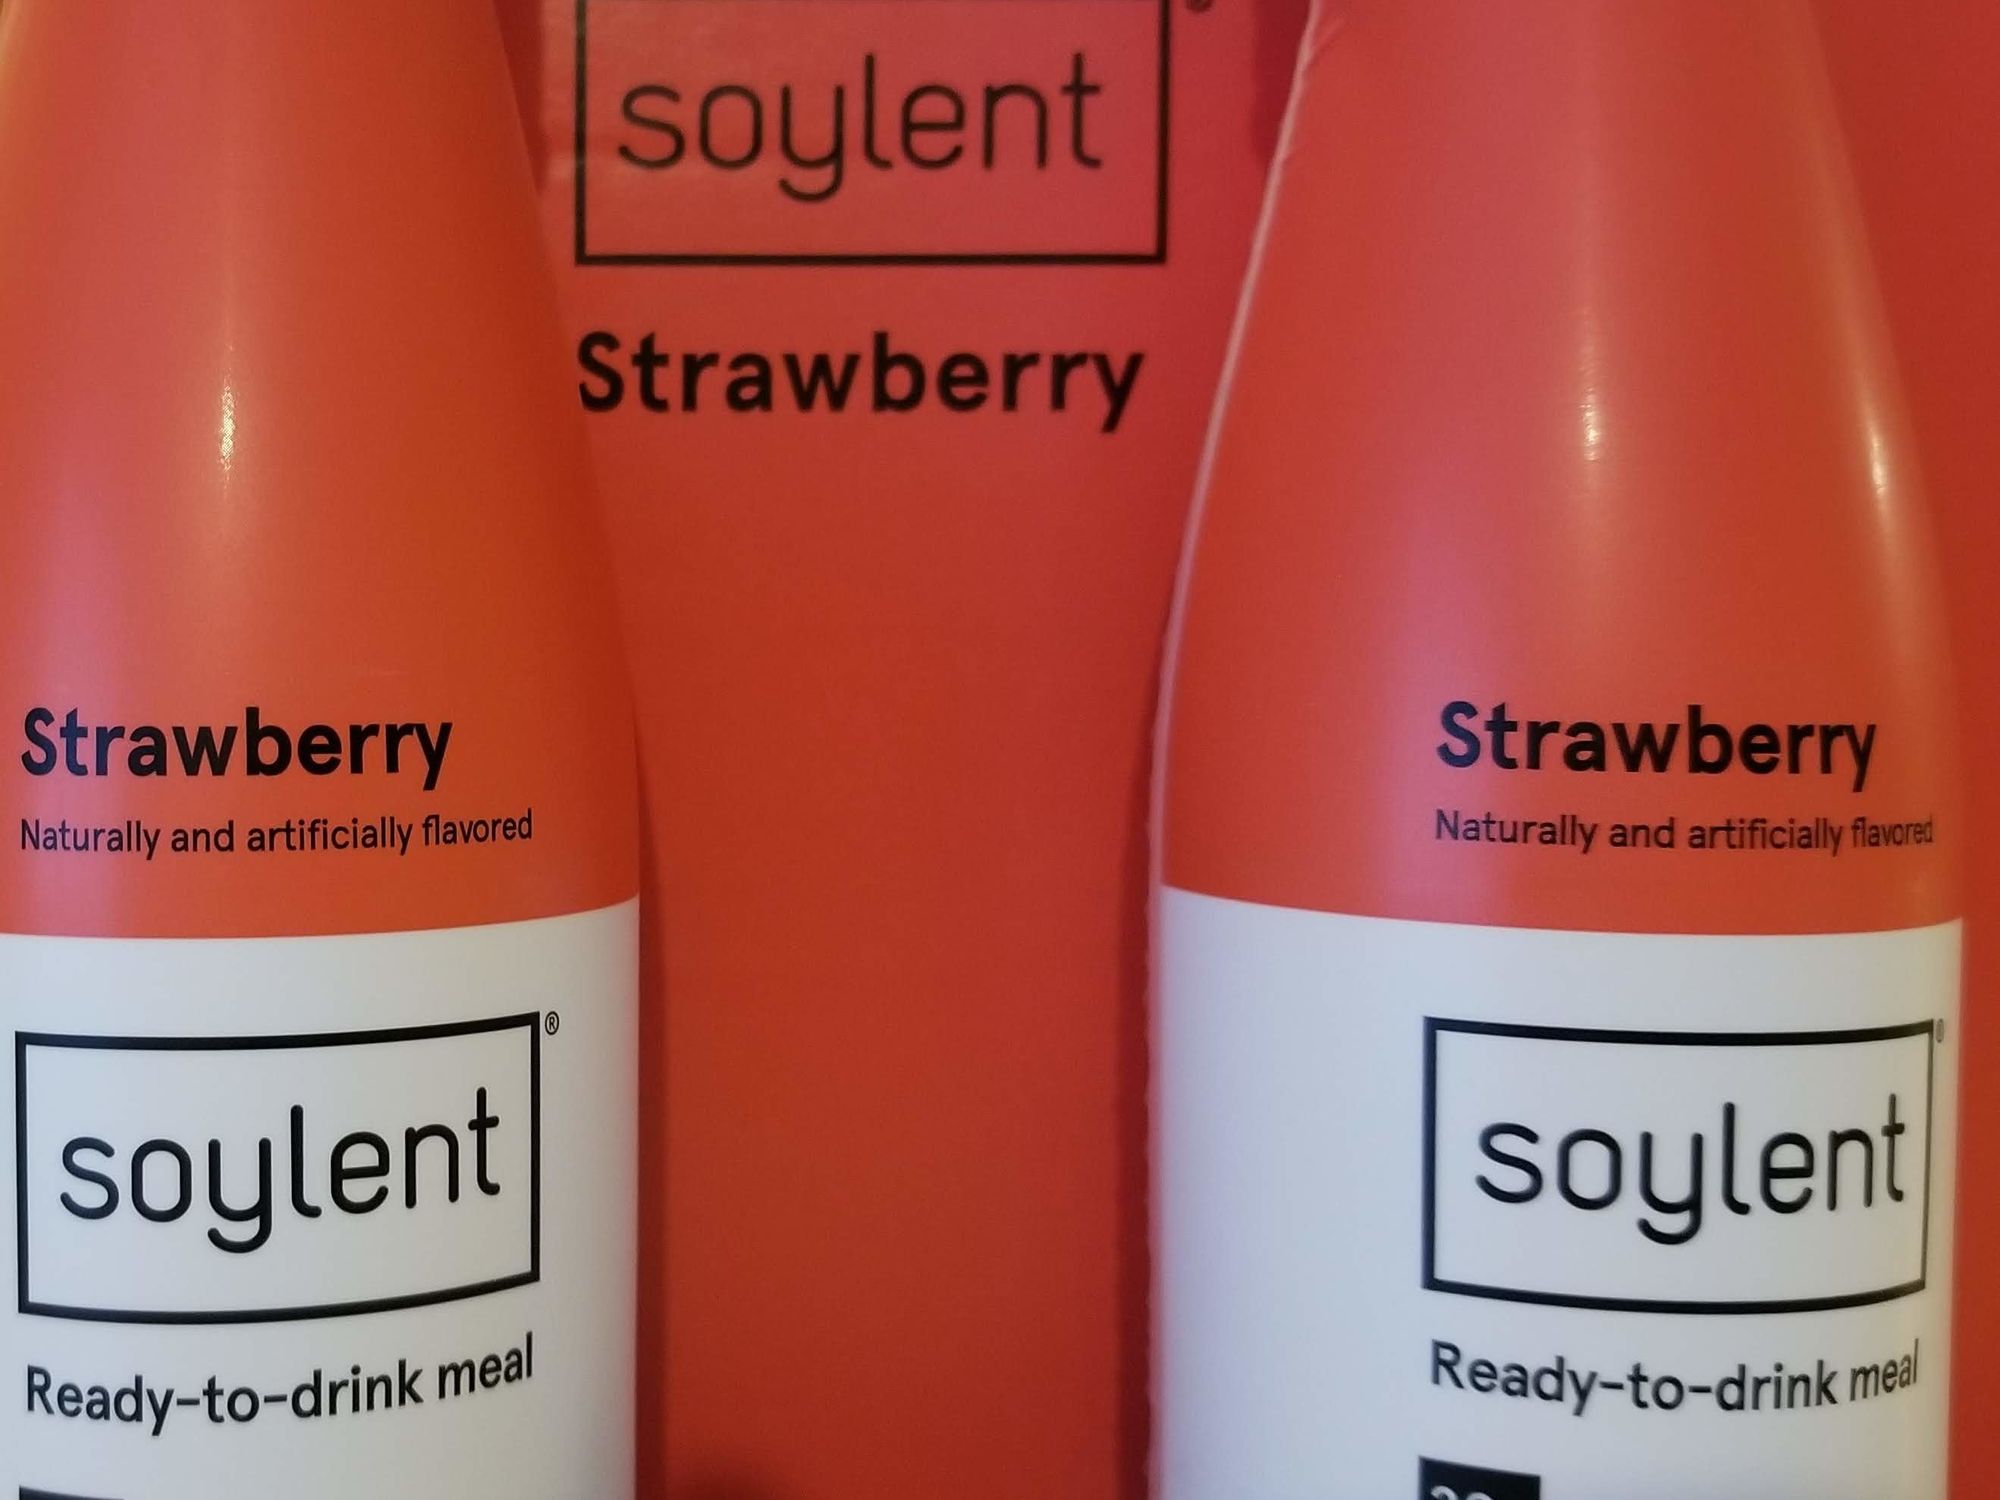 Soylent CEO Crowley Out as Meal Replacement Startup Looks to Re-Focus Strategy on 'Core Products'